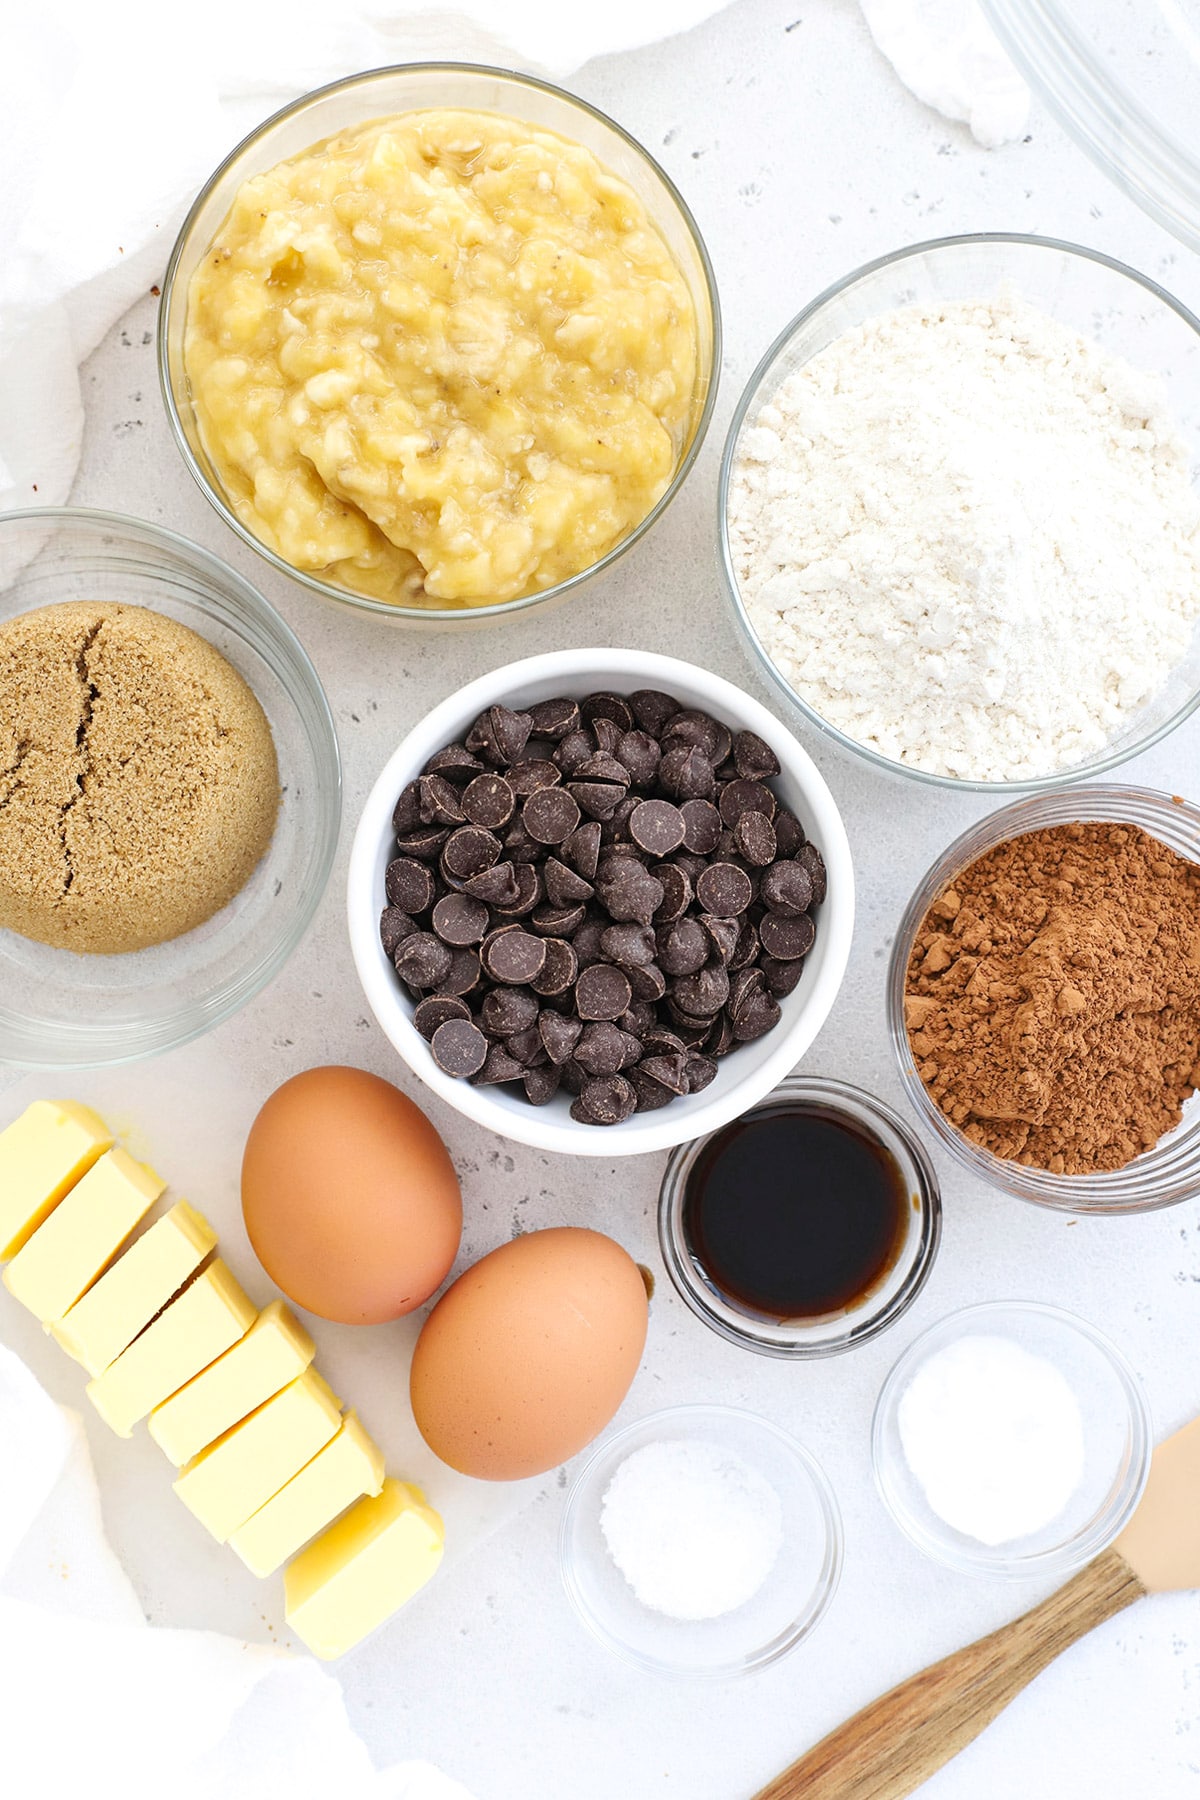 Overhead view of ingredients for gluten-free chocolate banana bread